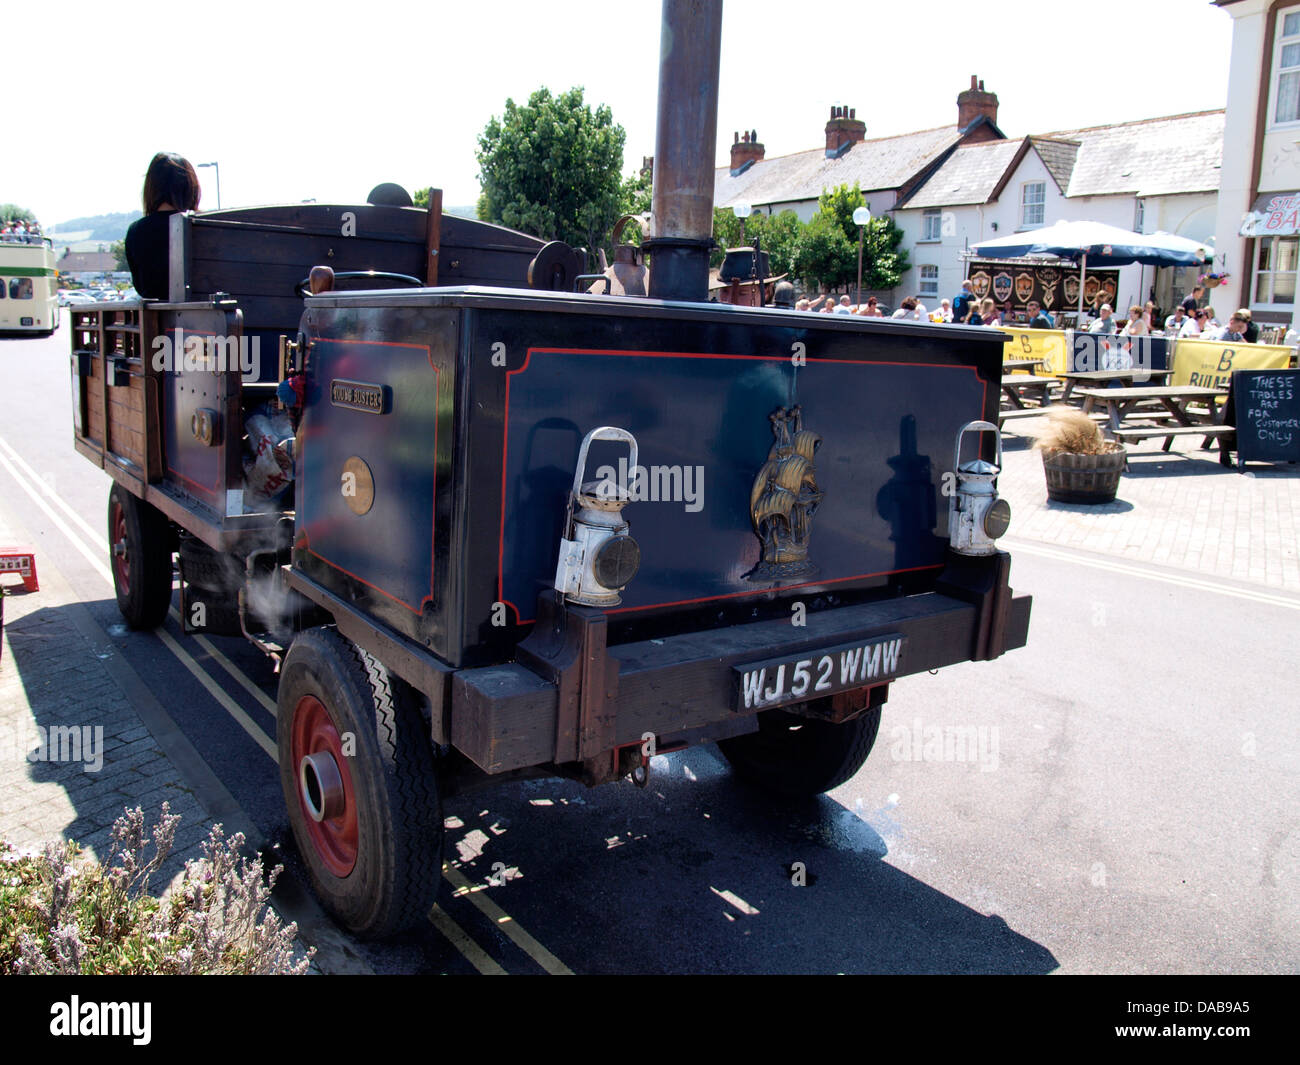 Young Buster steam driven vehicle, Minehead, Somerset. 2013 Stock Photo